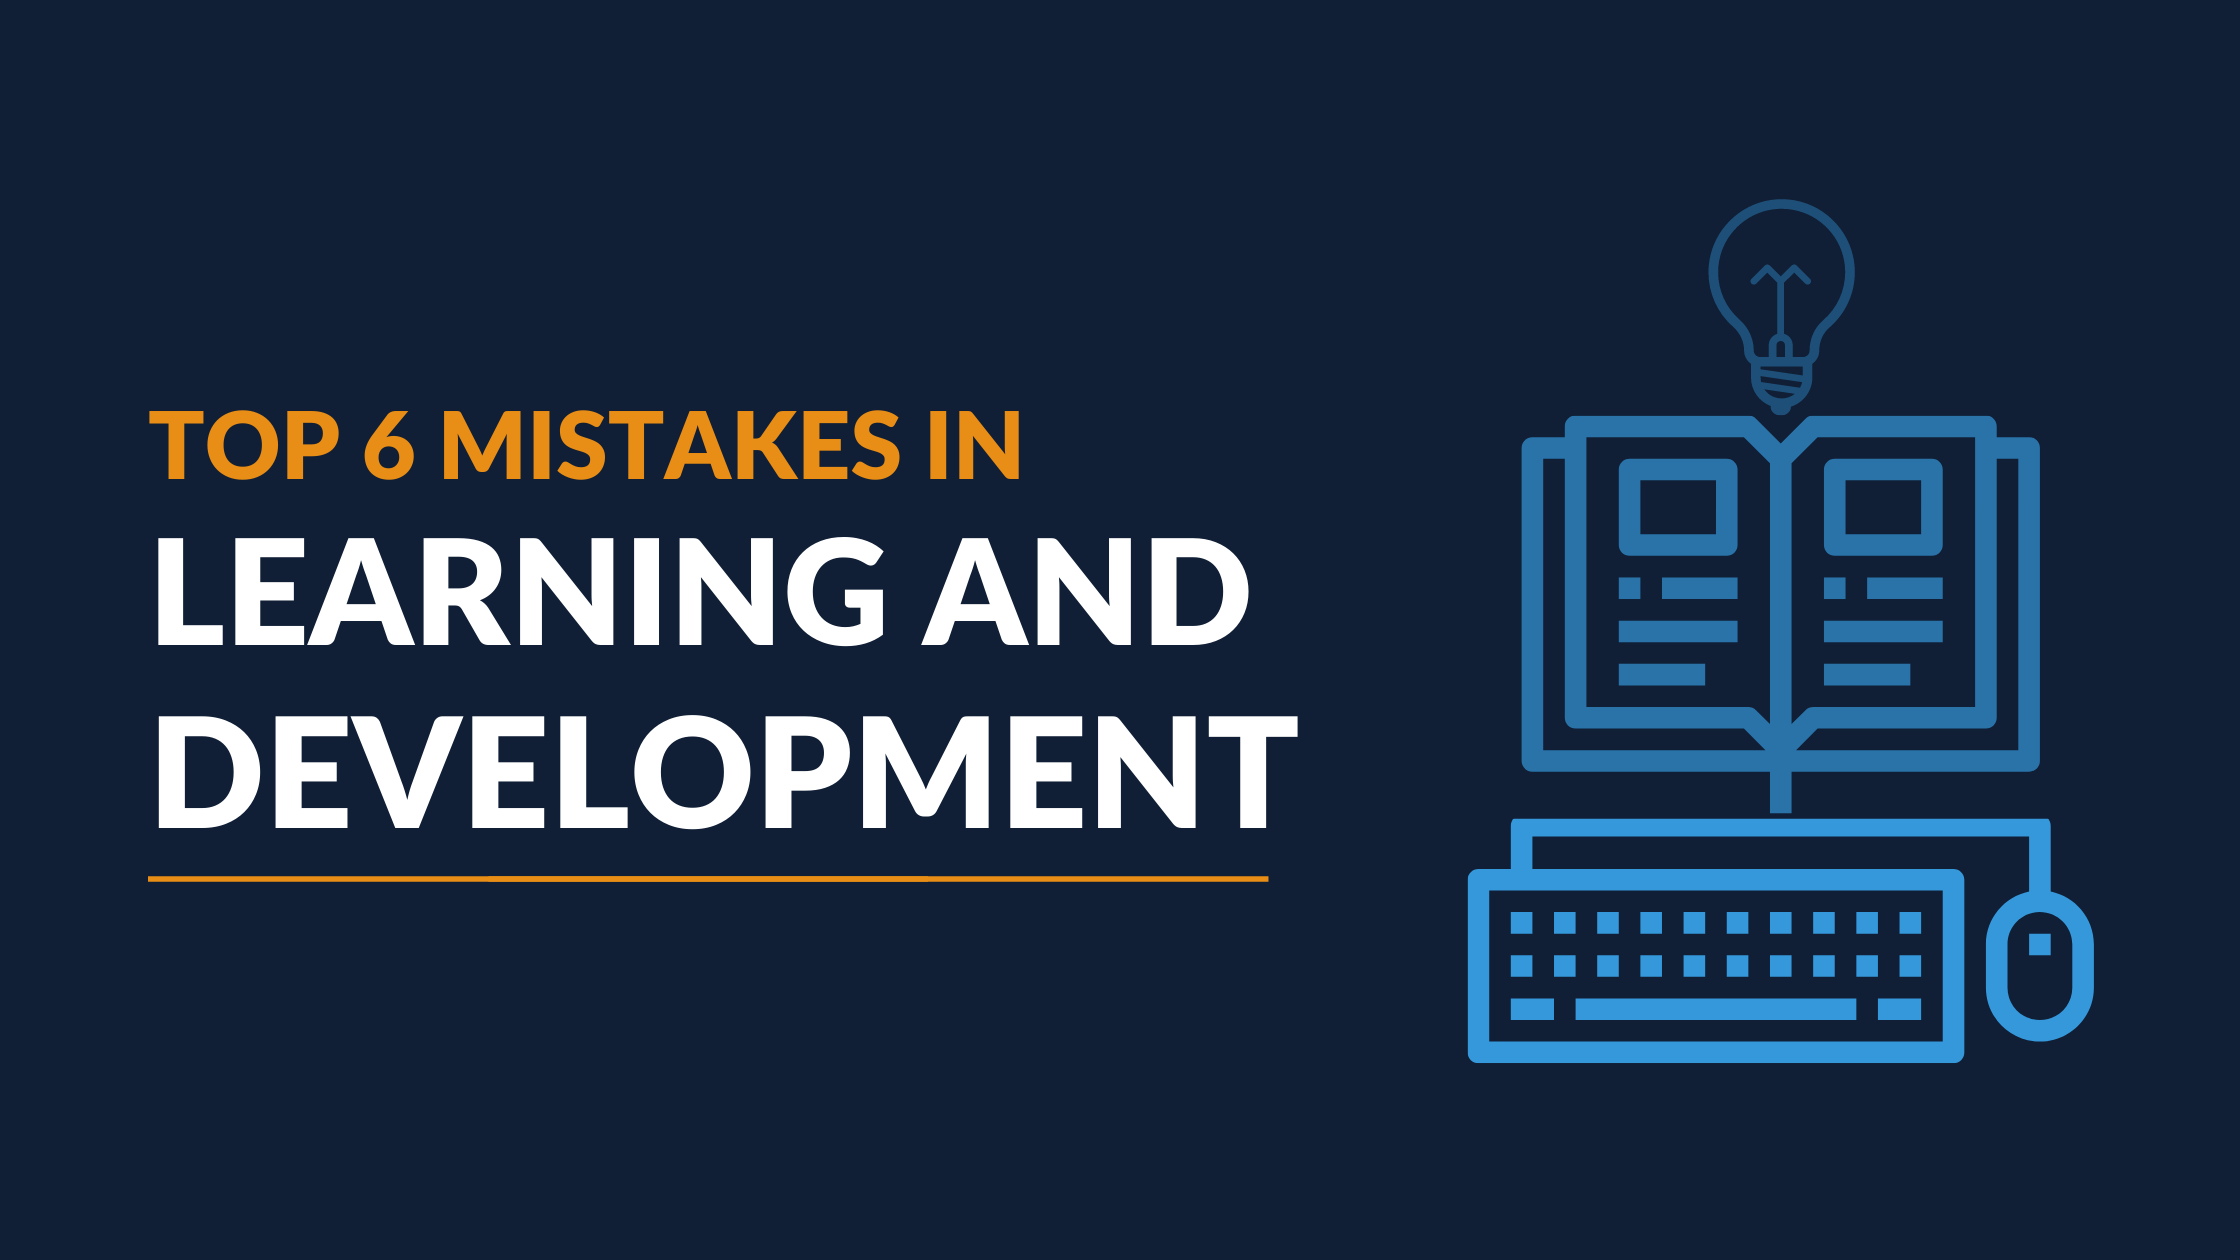 Top 6 L&D Mistakes (And How to Avoid Them)